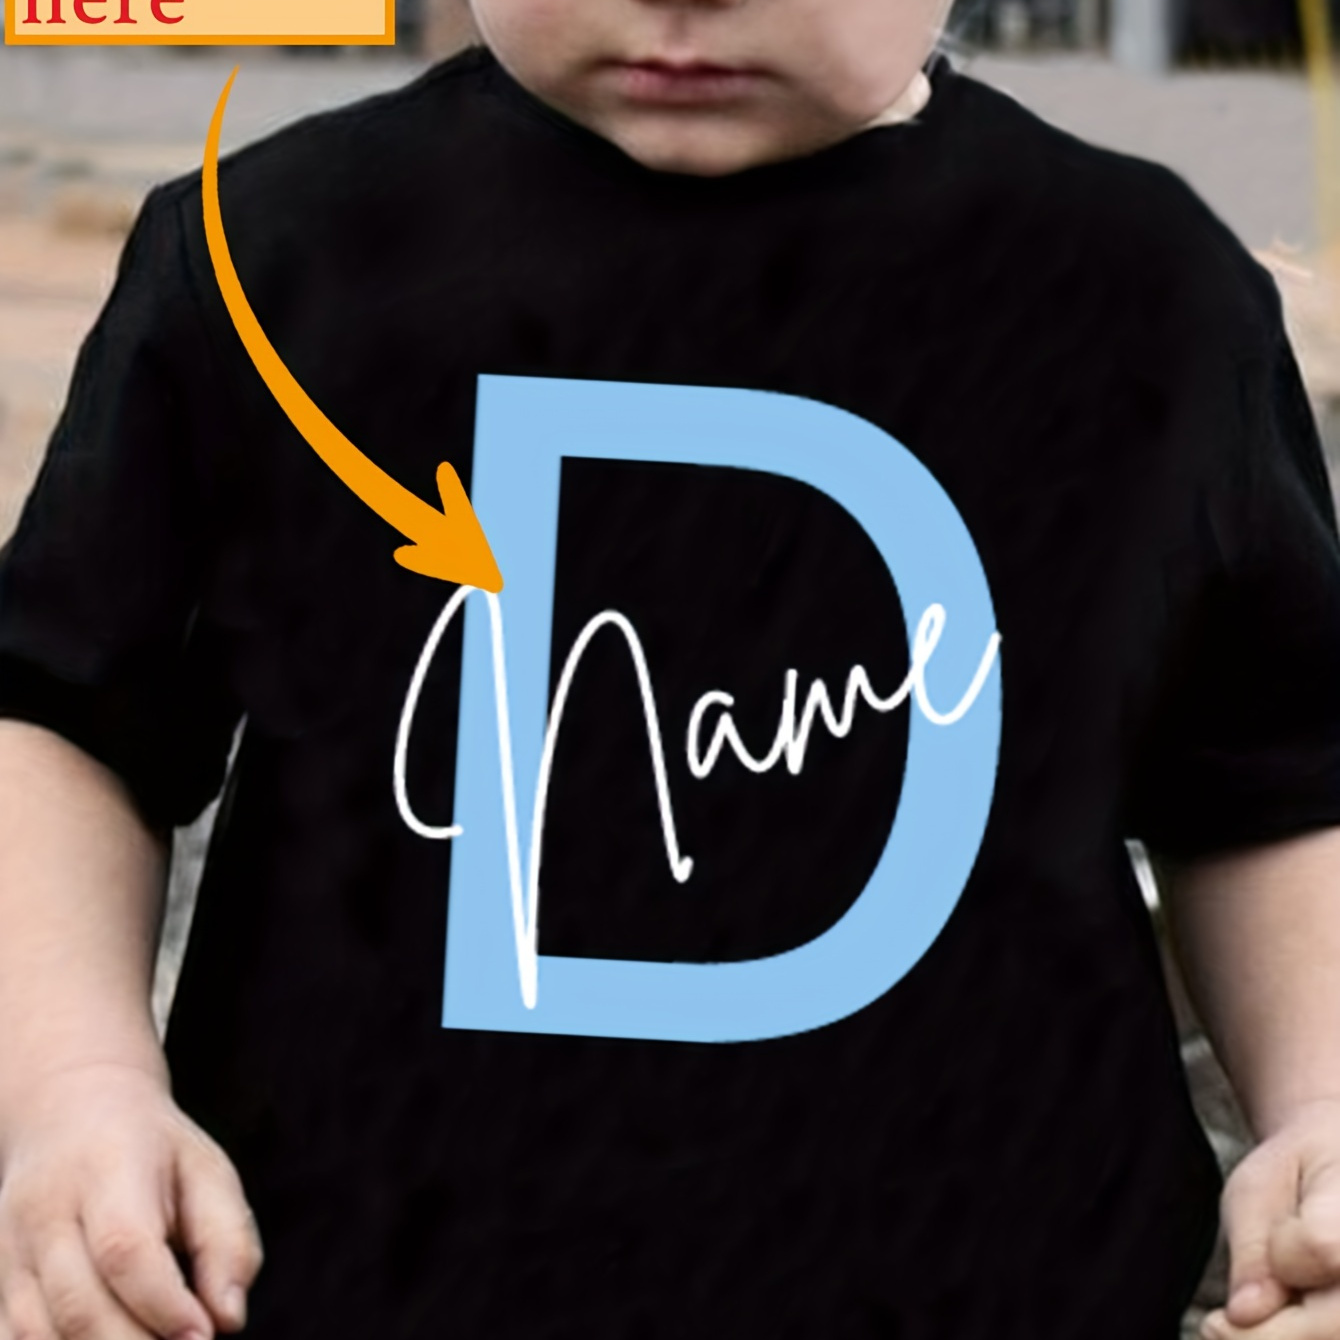 

Boy's Customized T-shirt, Cool Letter D Personalized Letter Print, Casual Comfy Short Sleeve Crew Neck Summer Top